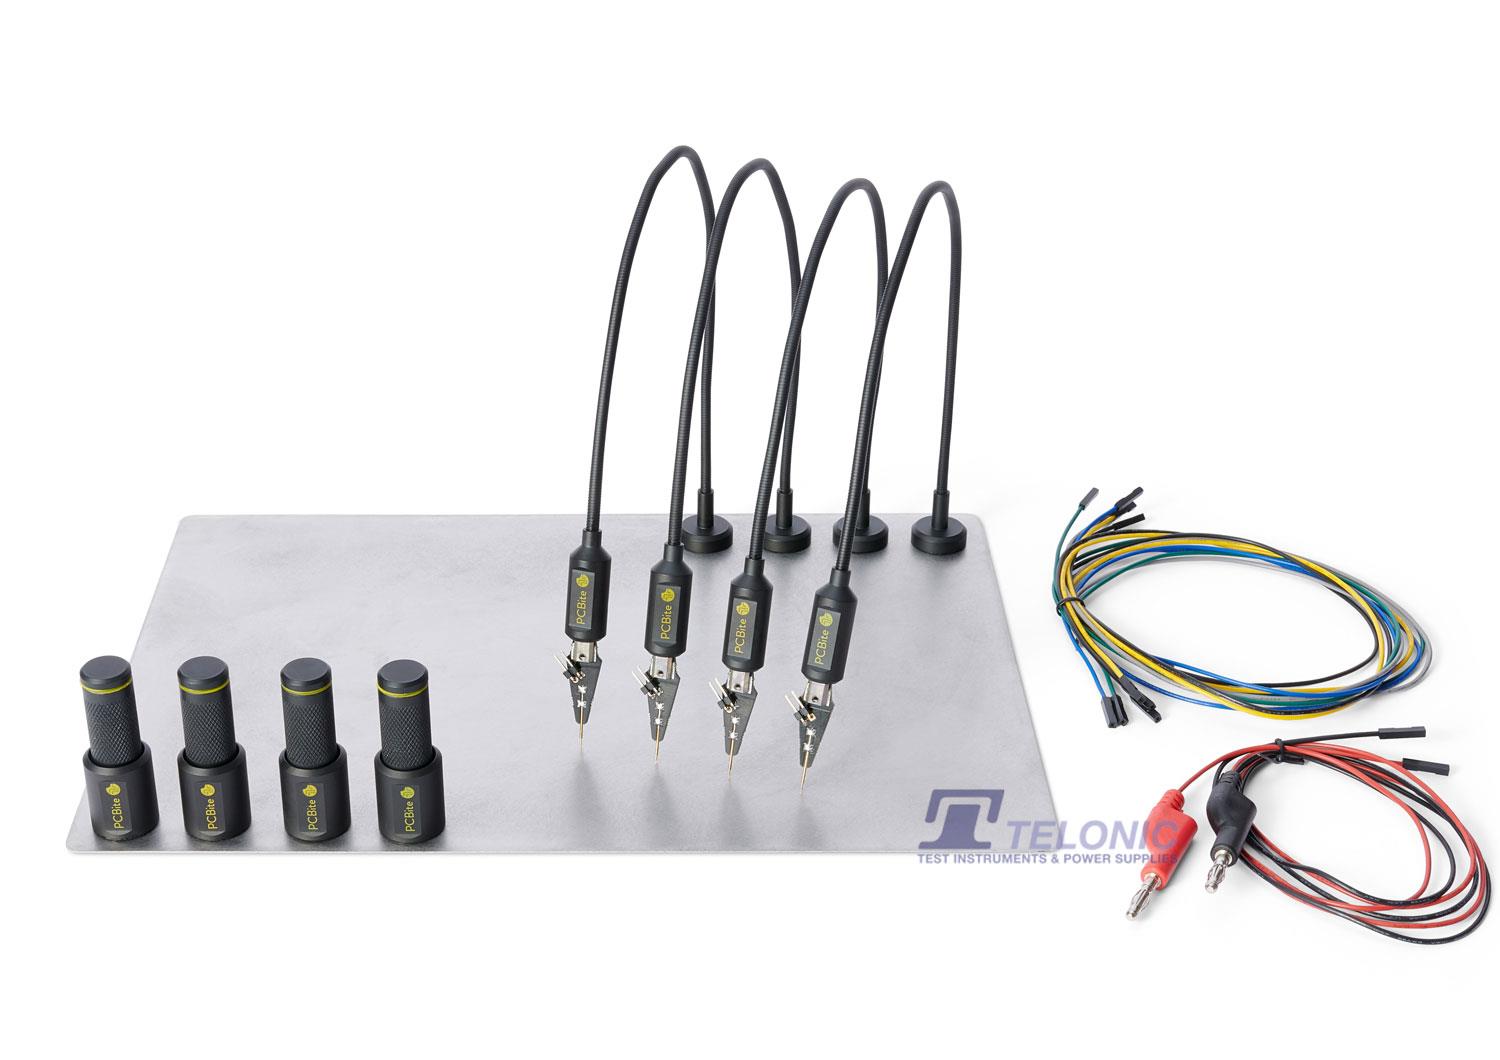 4003 Sensepeek PCBite Kit with 4x SP10 Probes and Test Wires